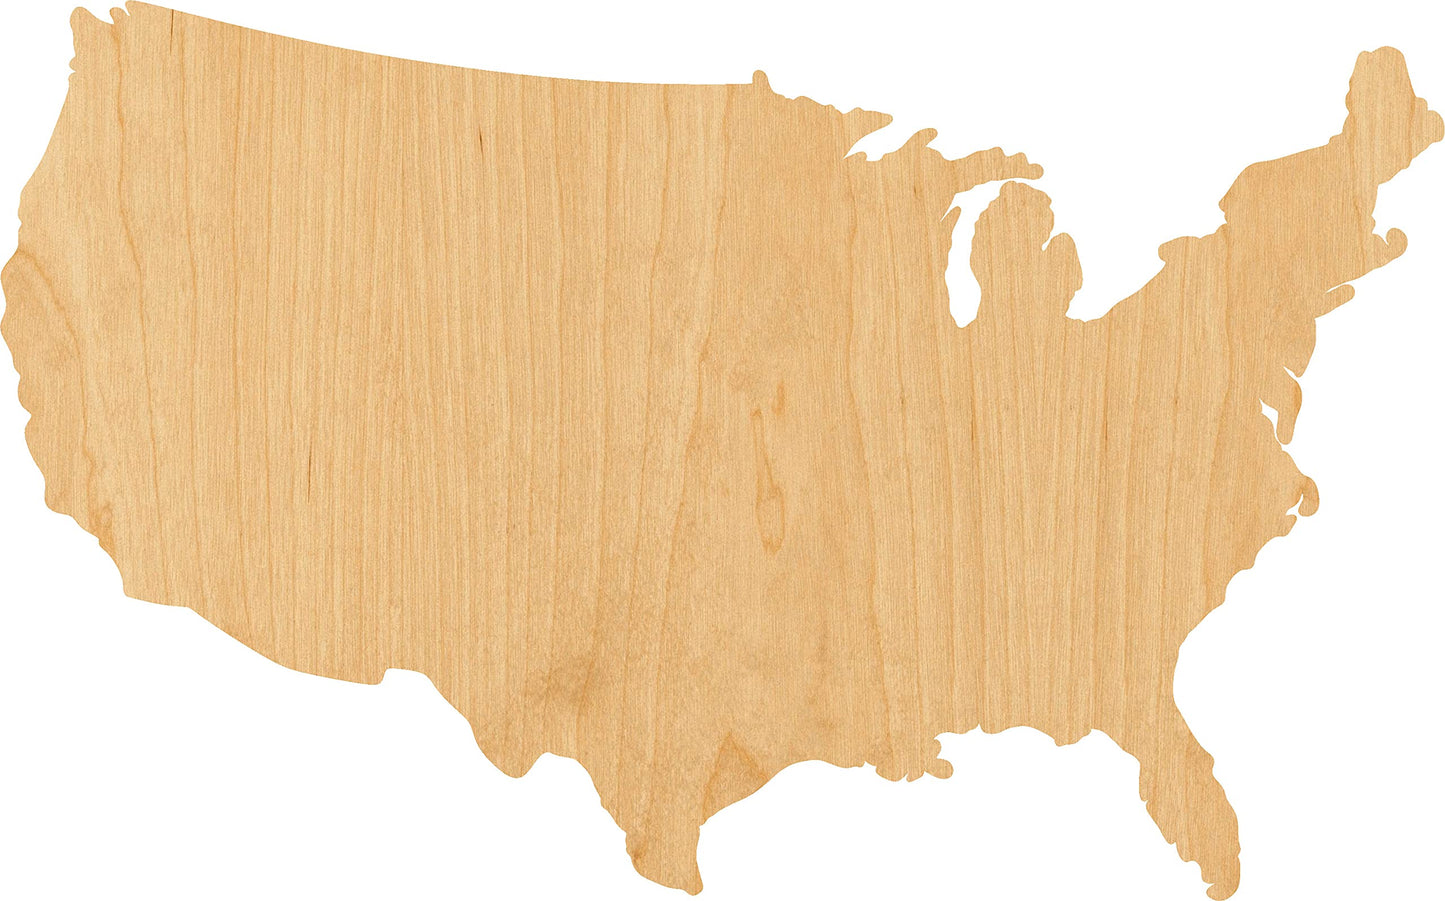 United States Laser Cut Out Wood Shape Craft Supply - 4 Inch